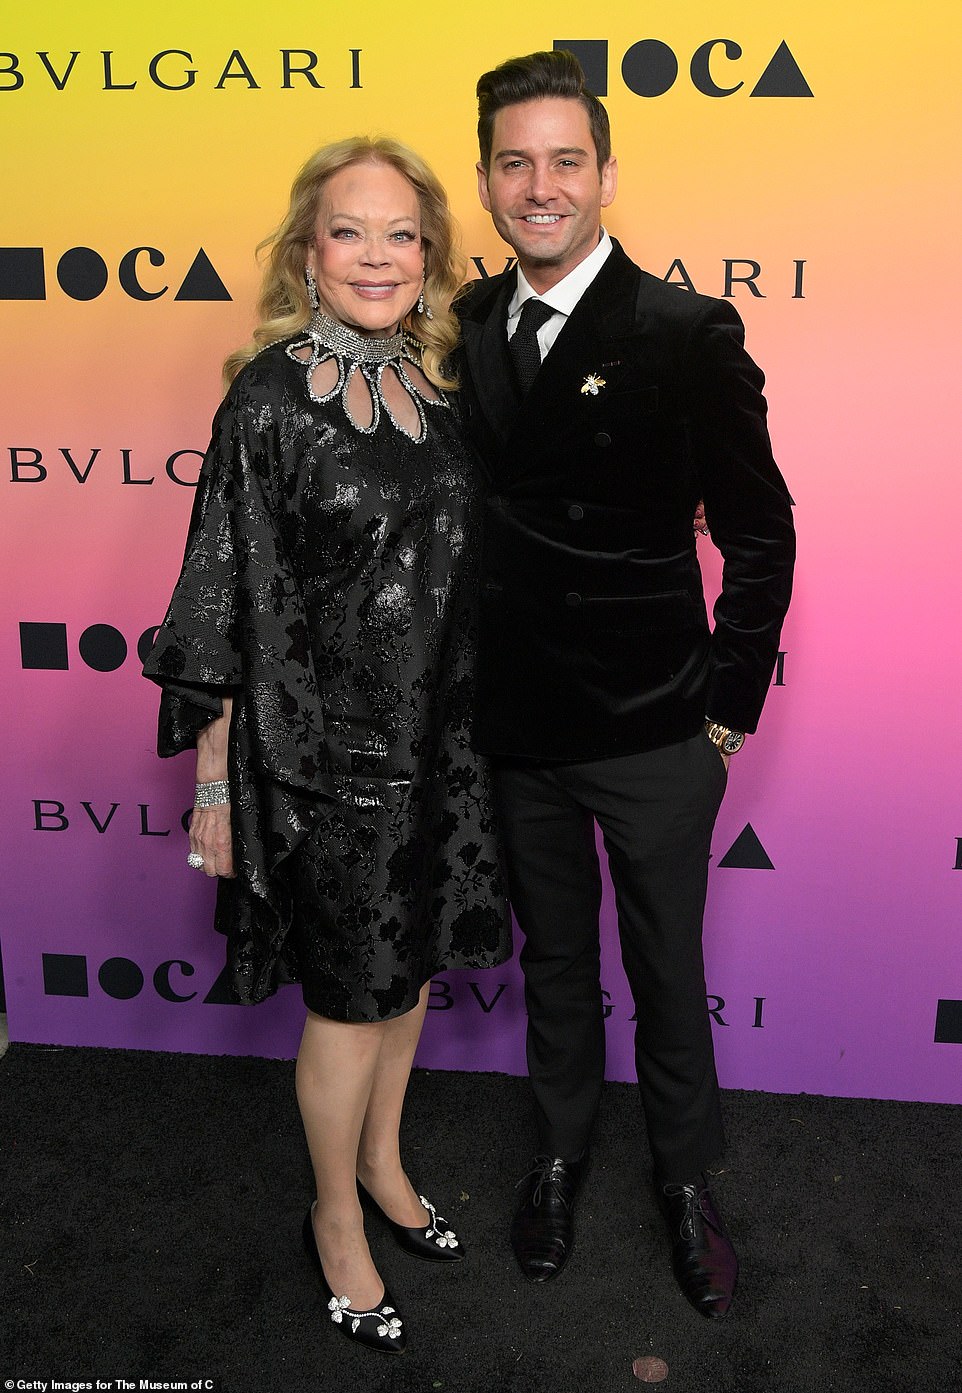 Candy Spelling and Josh Flagg made a pretty adorable couple on the red carpet